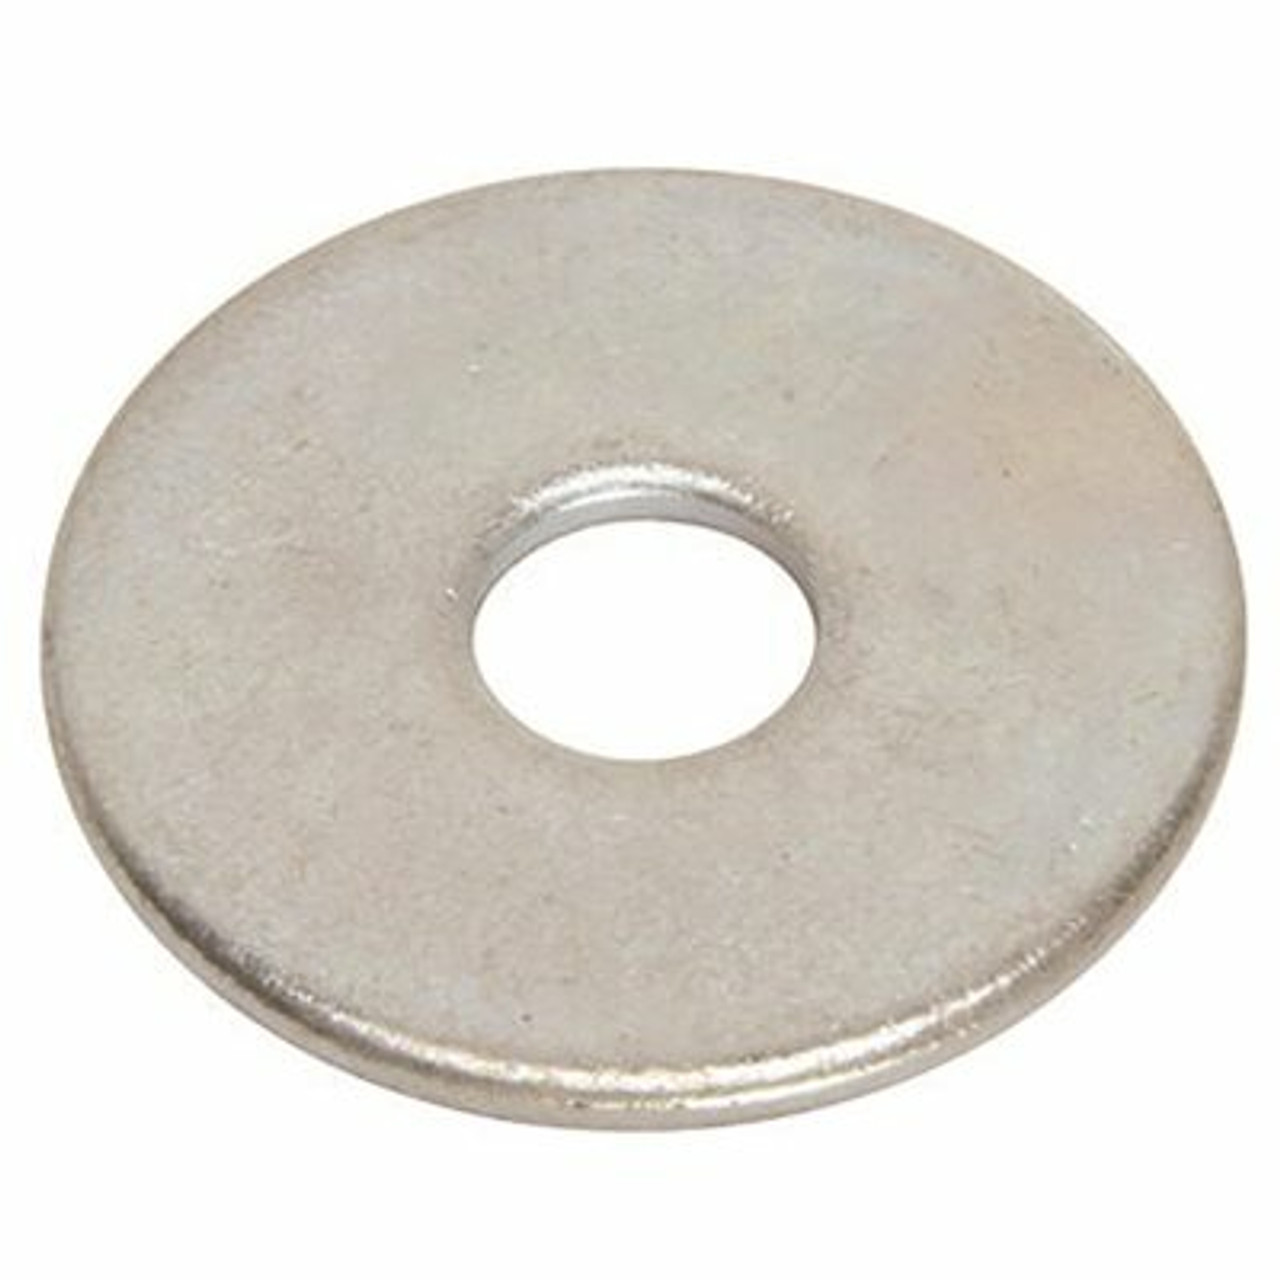 1/4 In. X 1-1/4 In. Fender Washers (100 Per Pack)